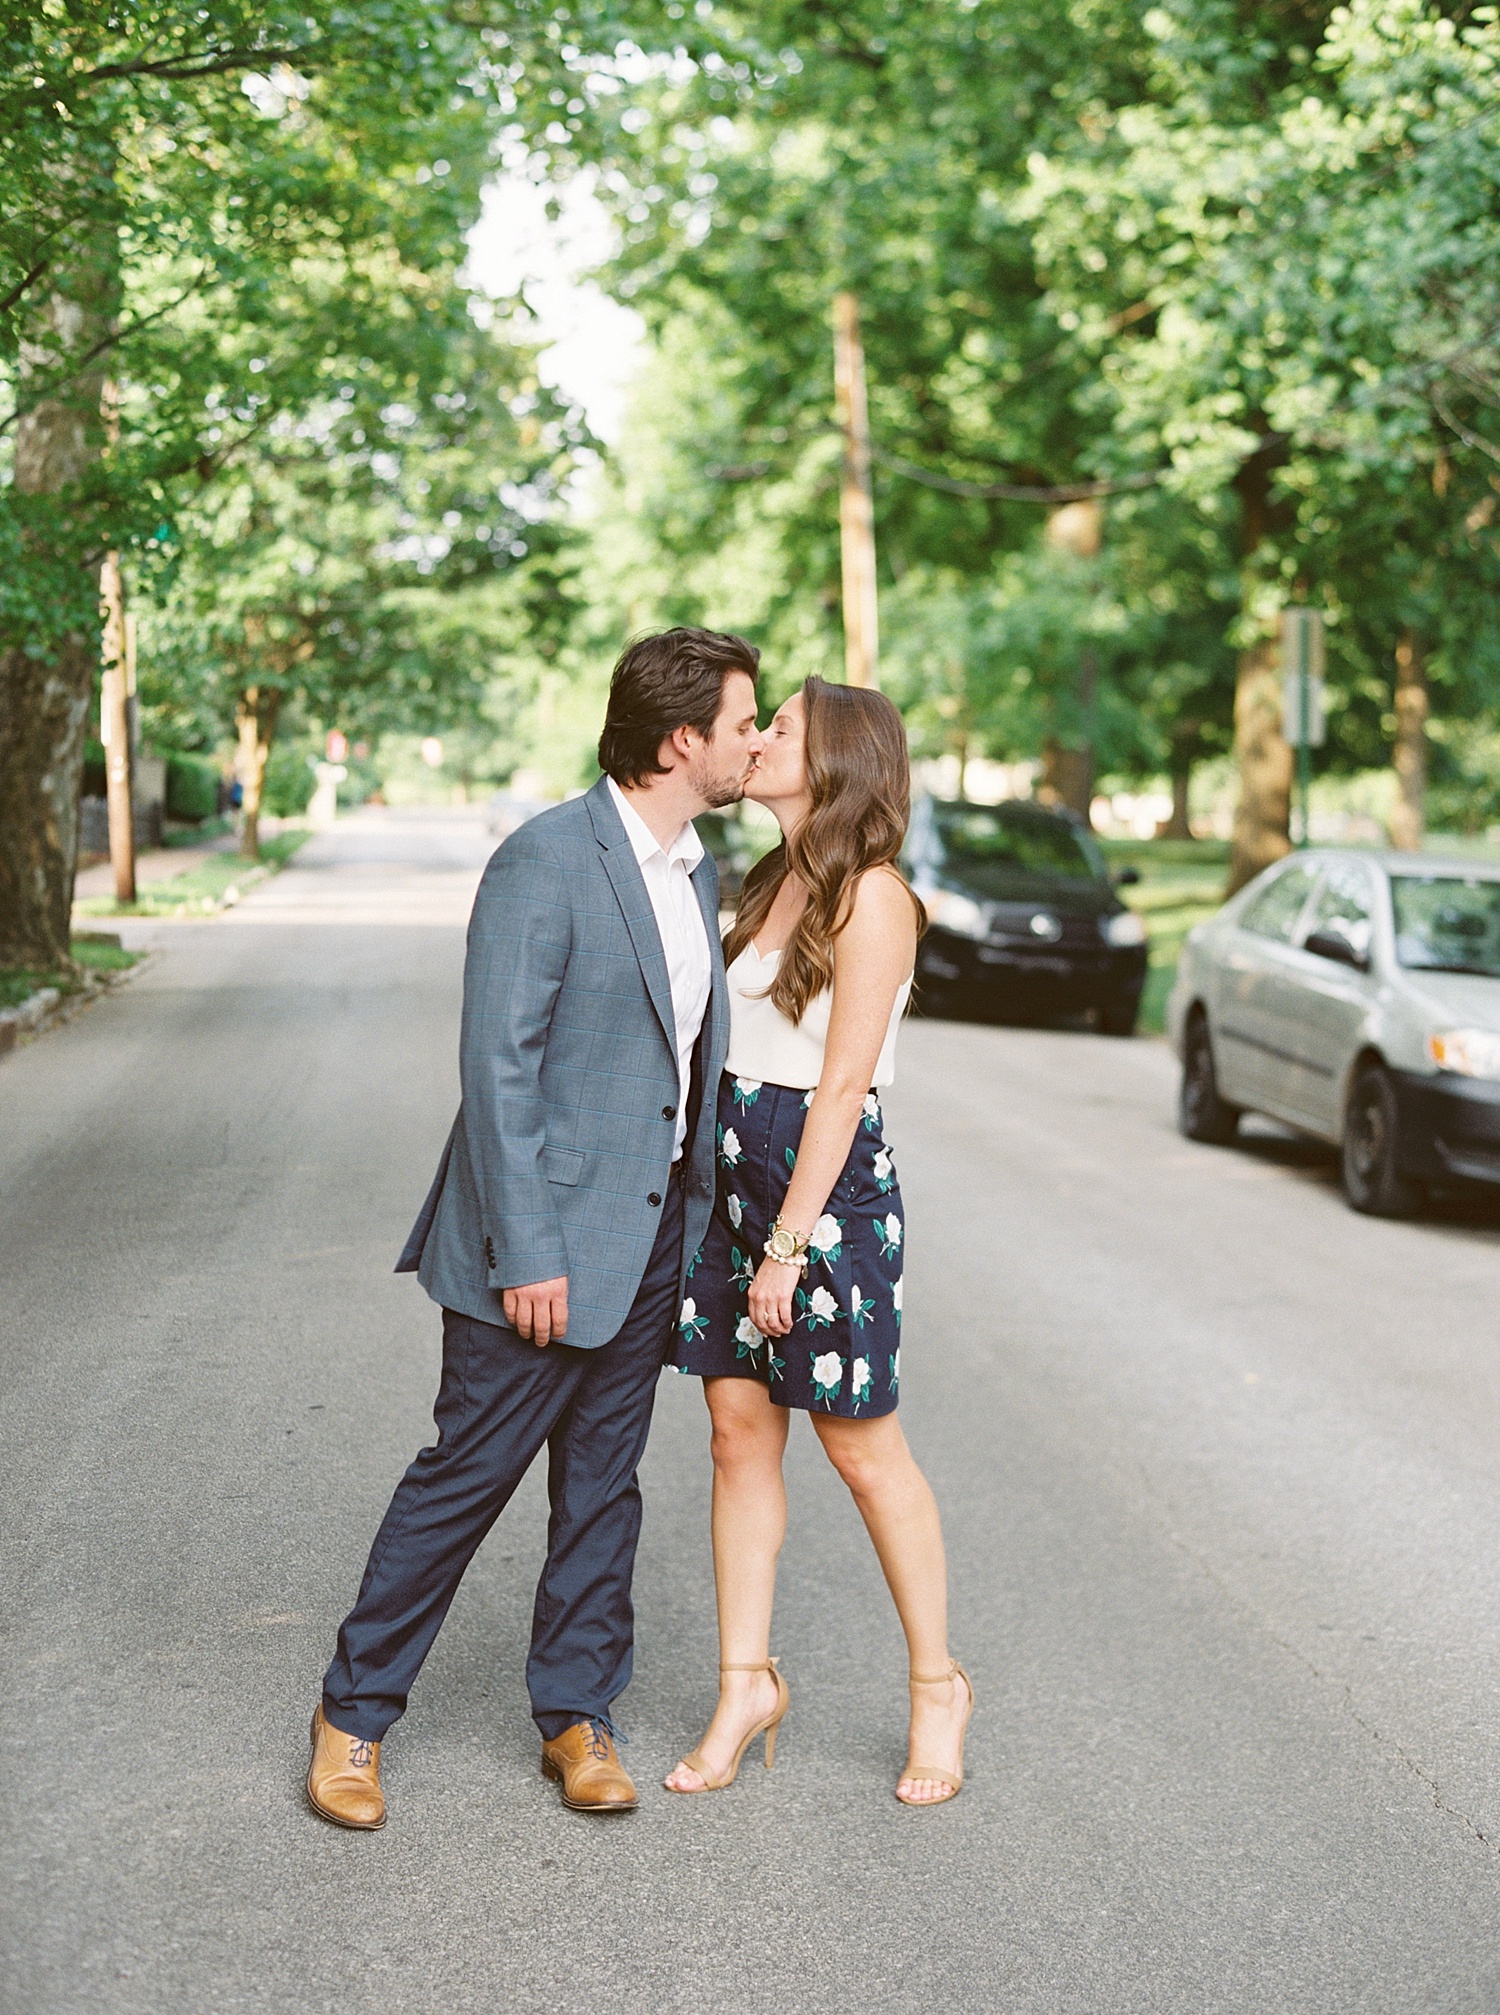 Downtown Lexington Engagement Session Talon Winery Picnic Engagement Session Gal Meets Glam Anthropologie Dress Laura Bodnar Photography Lexington Wedding Photographer Film Photography_0005-1.jpg